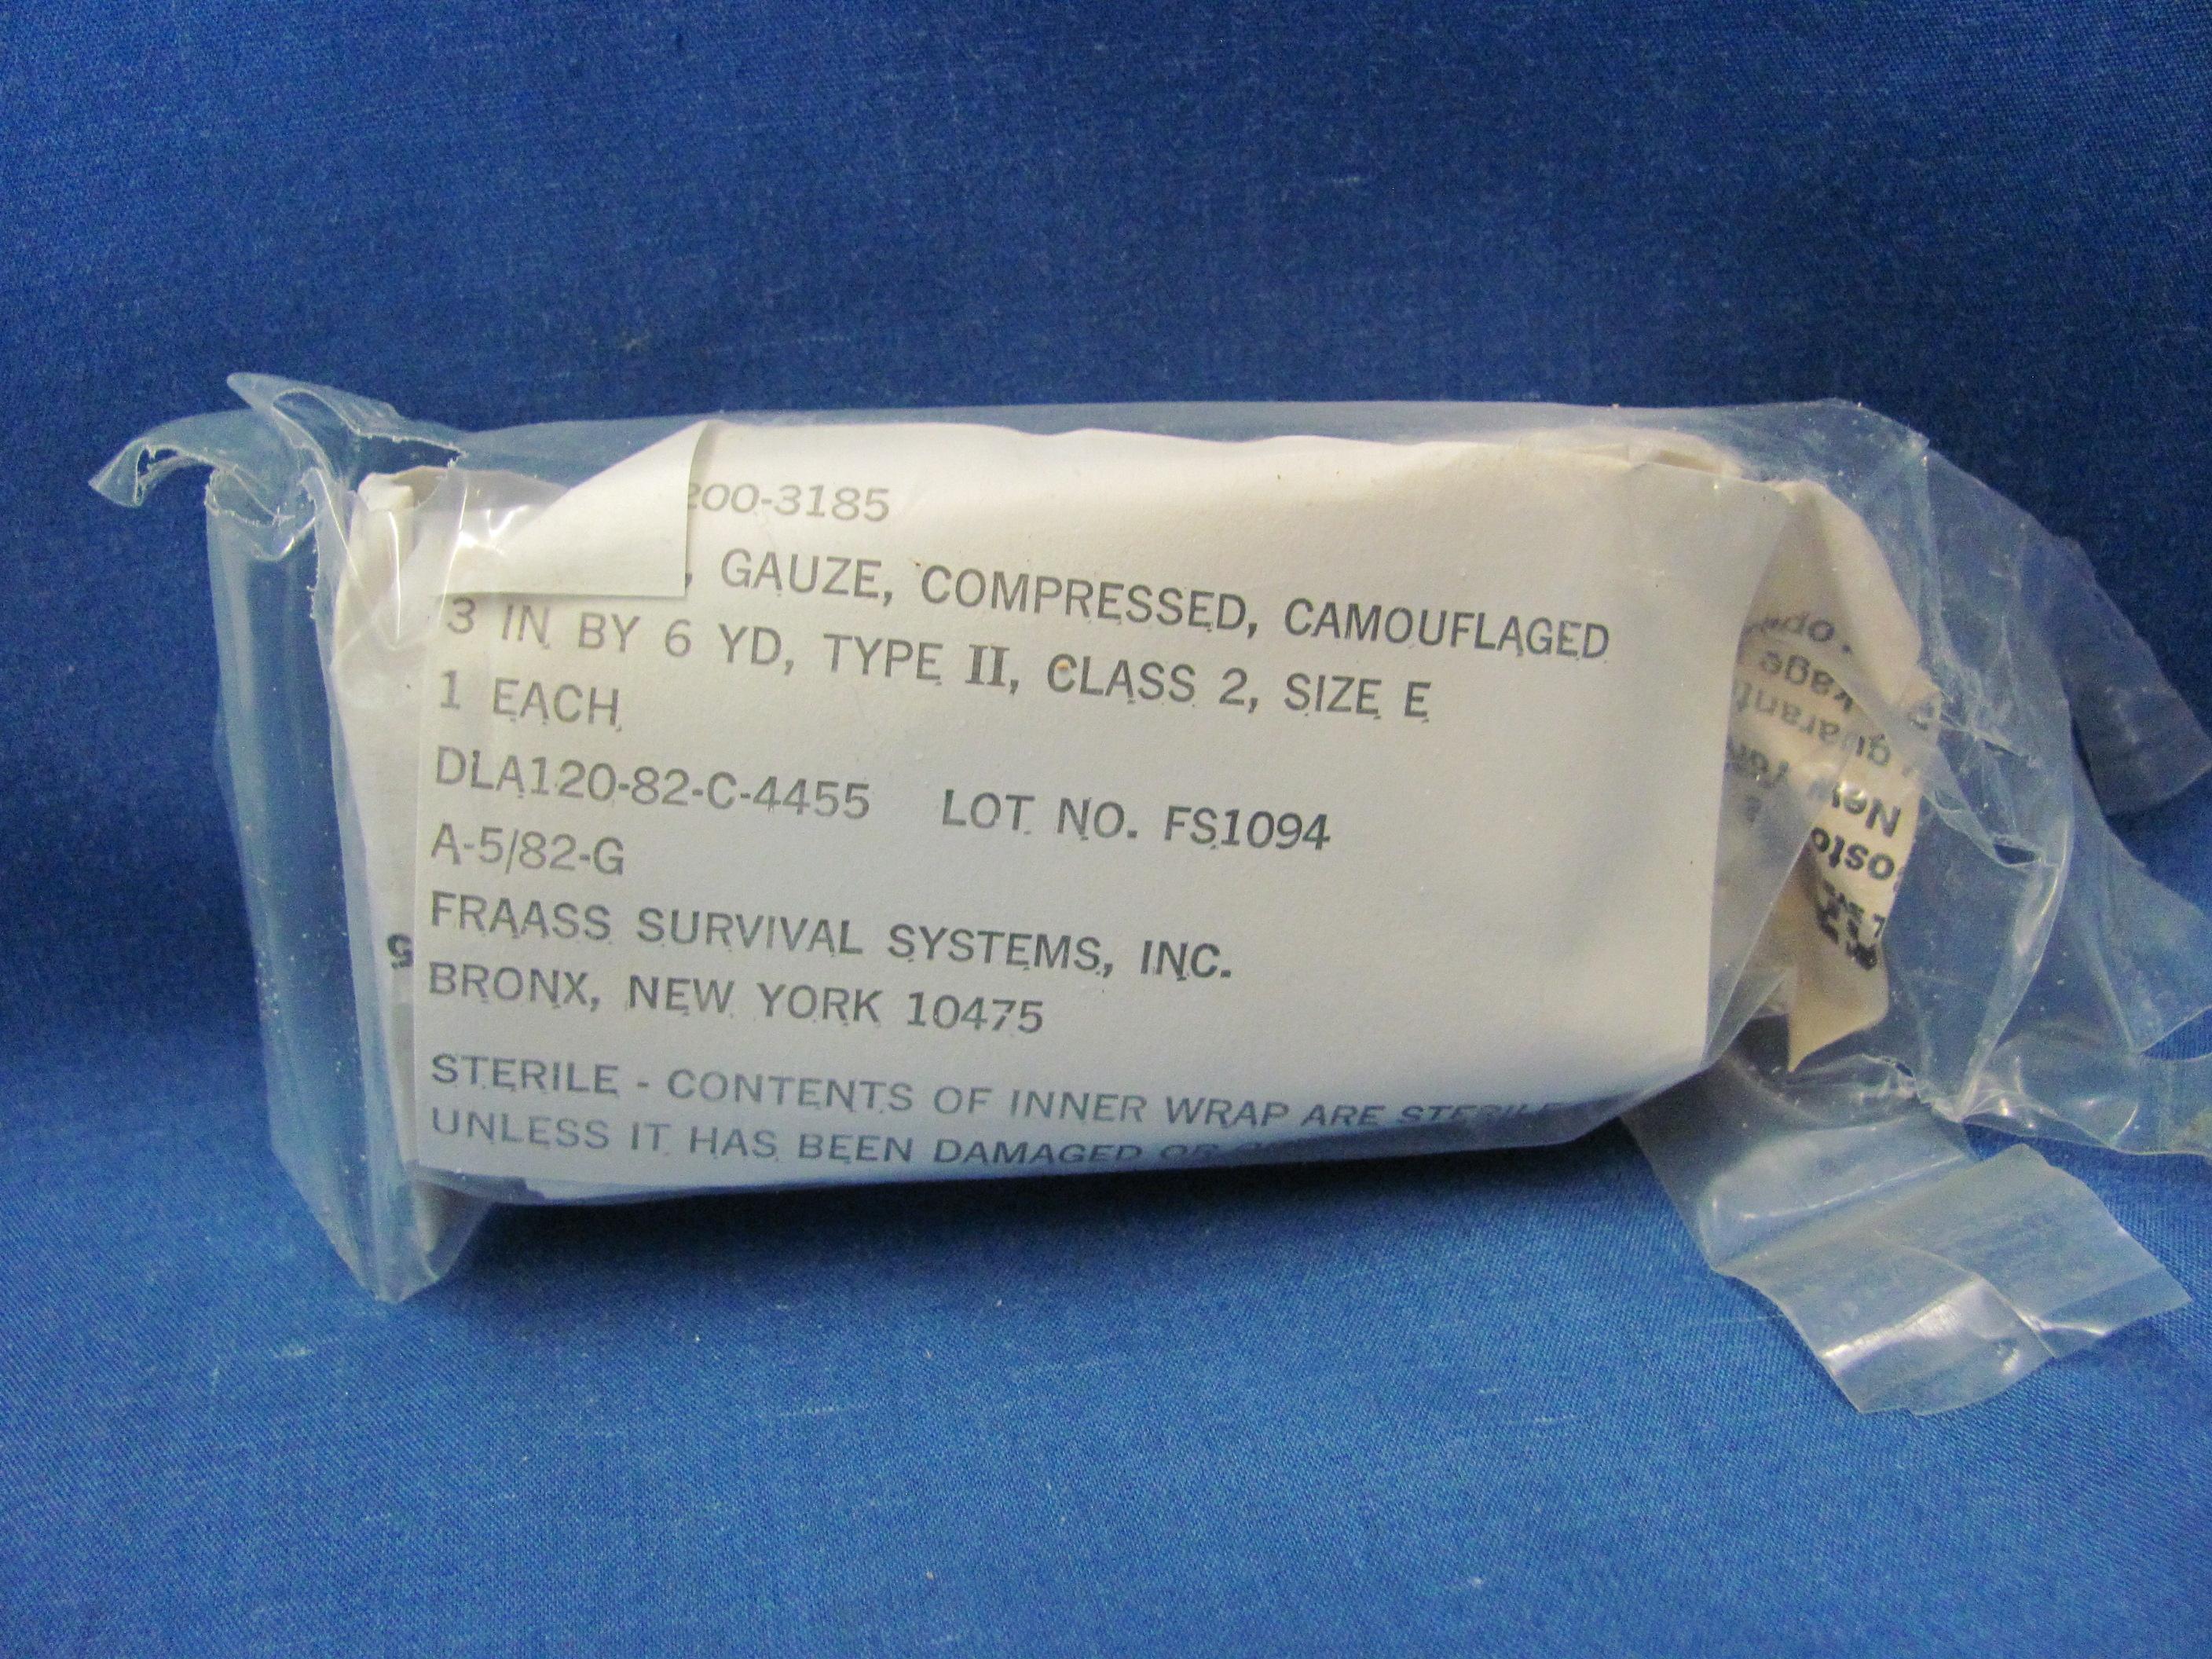 U.S. Military First Aid Kit & Other Medical Items – As Shown